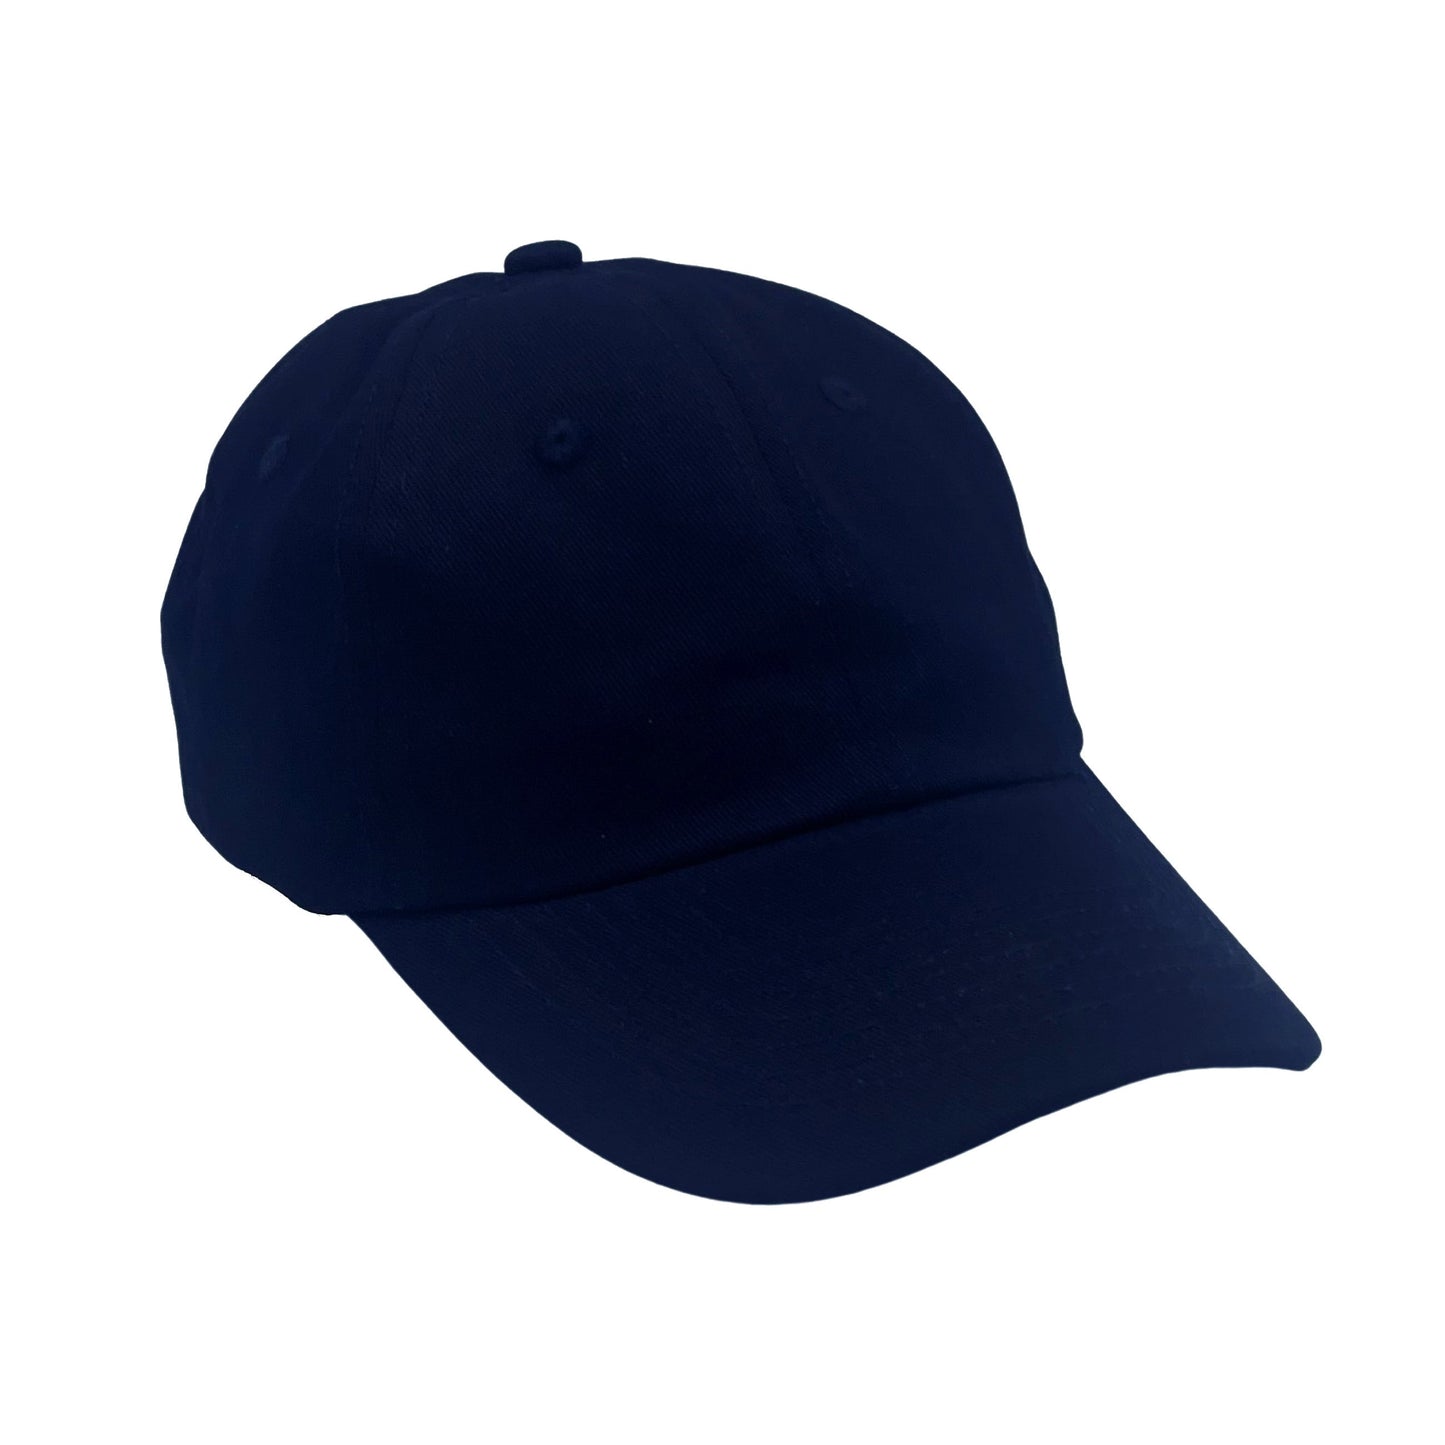 Customizable Baseball Hat in Nellie Navy (Adult)